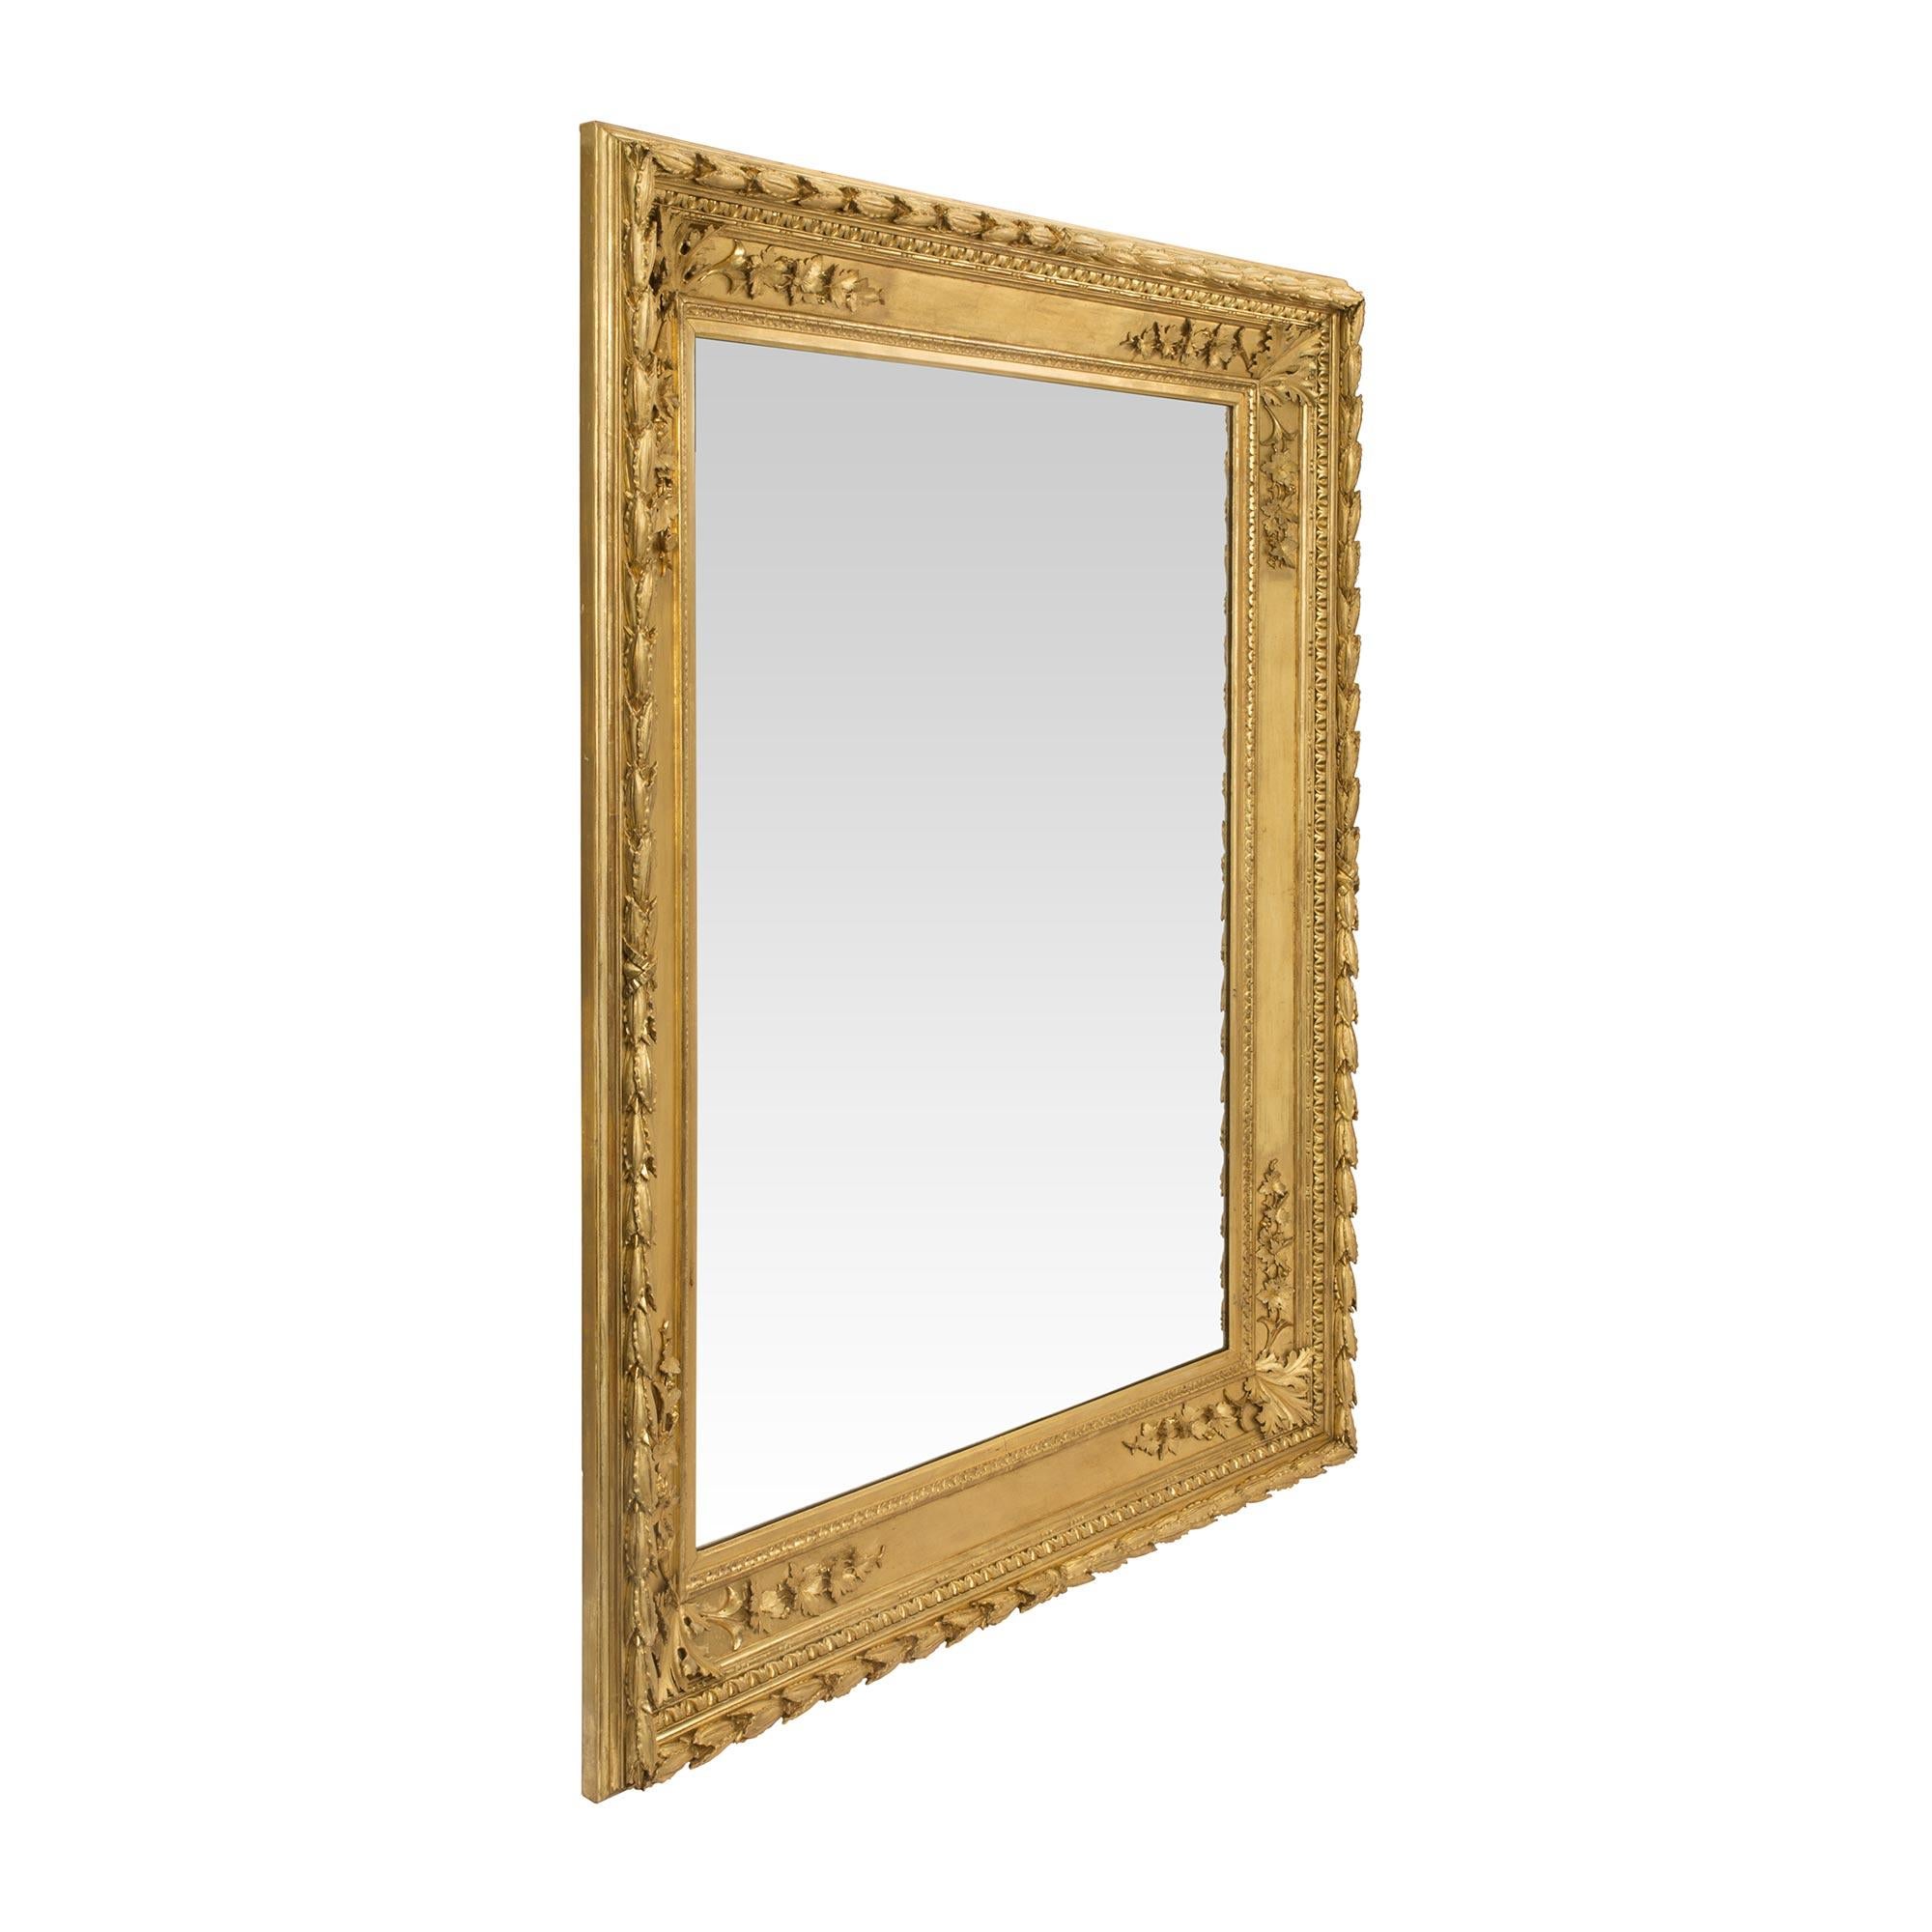 A striking Italian early 19th century Louis XVI st. giltwood mirror. The mirror displays a beautiful and richly carved frame with a Fine foliate border. At each corner are charming grape leaves and bunches of grapes. This mirror can be displayed